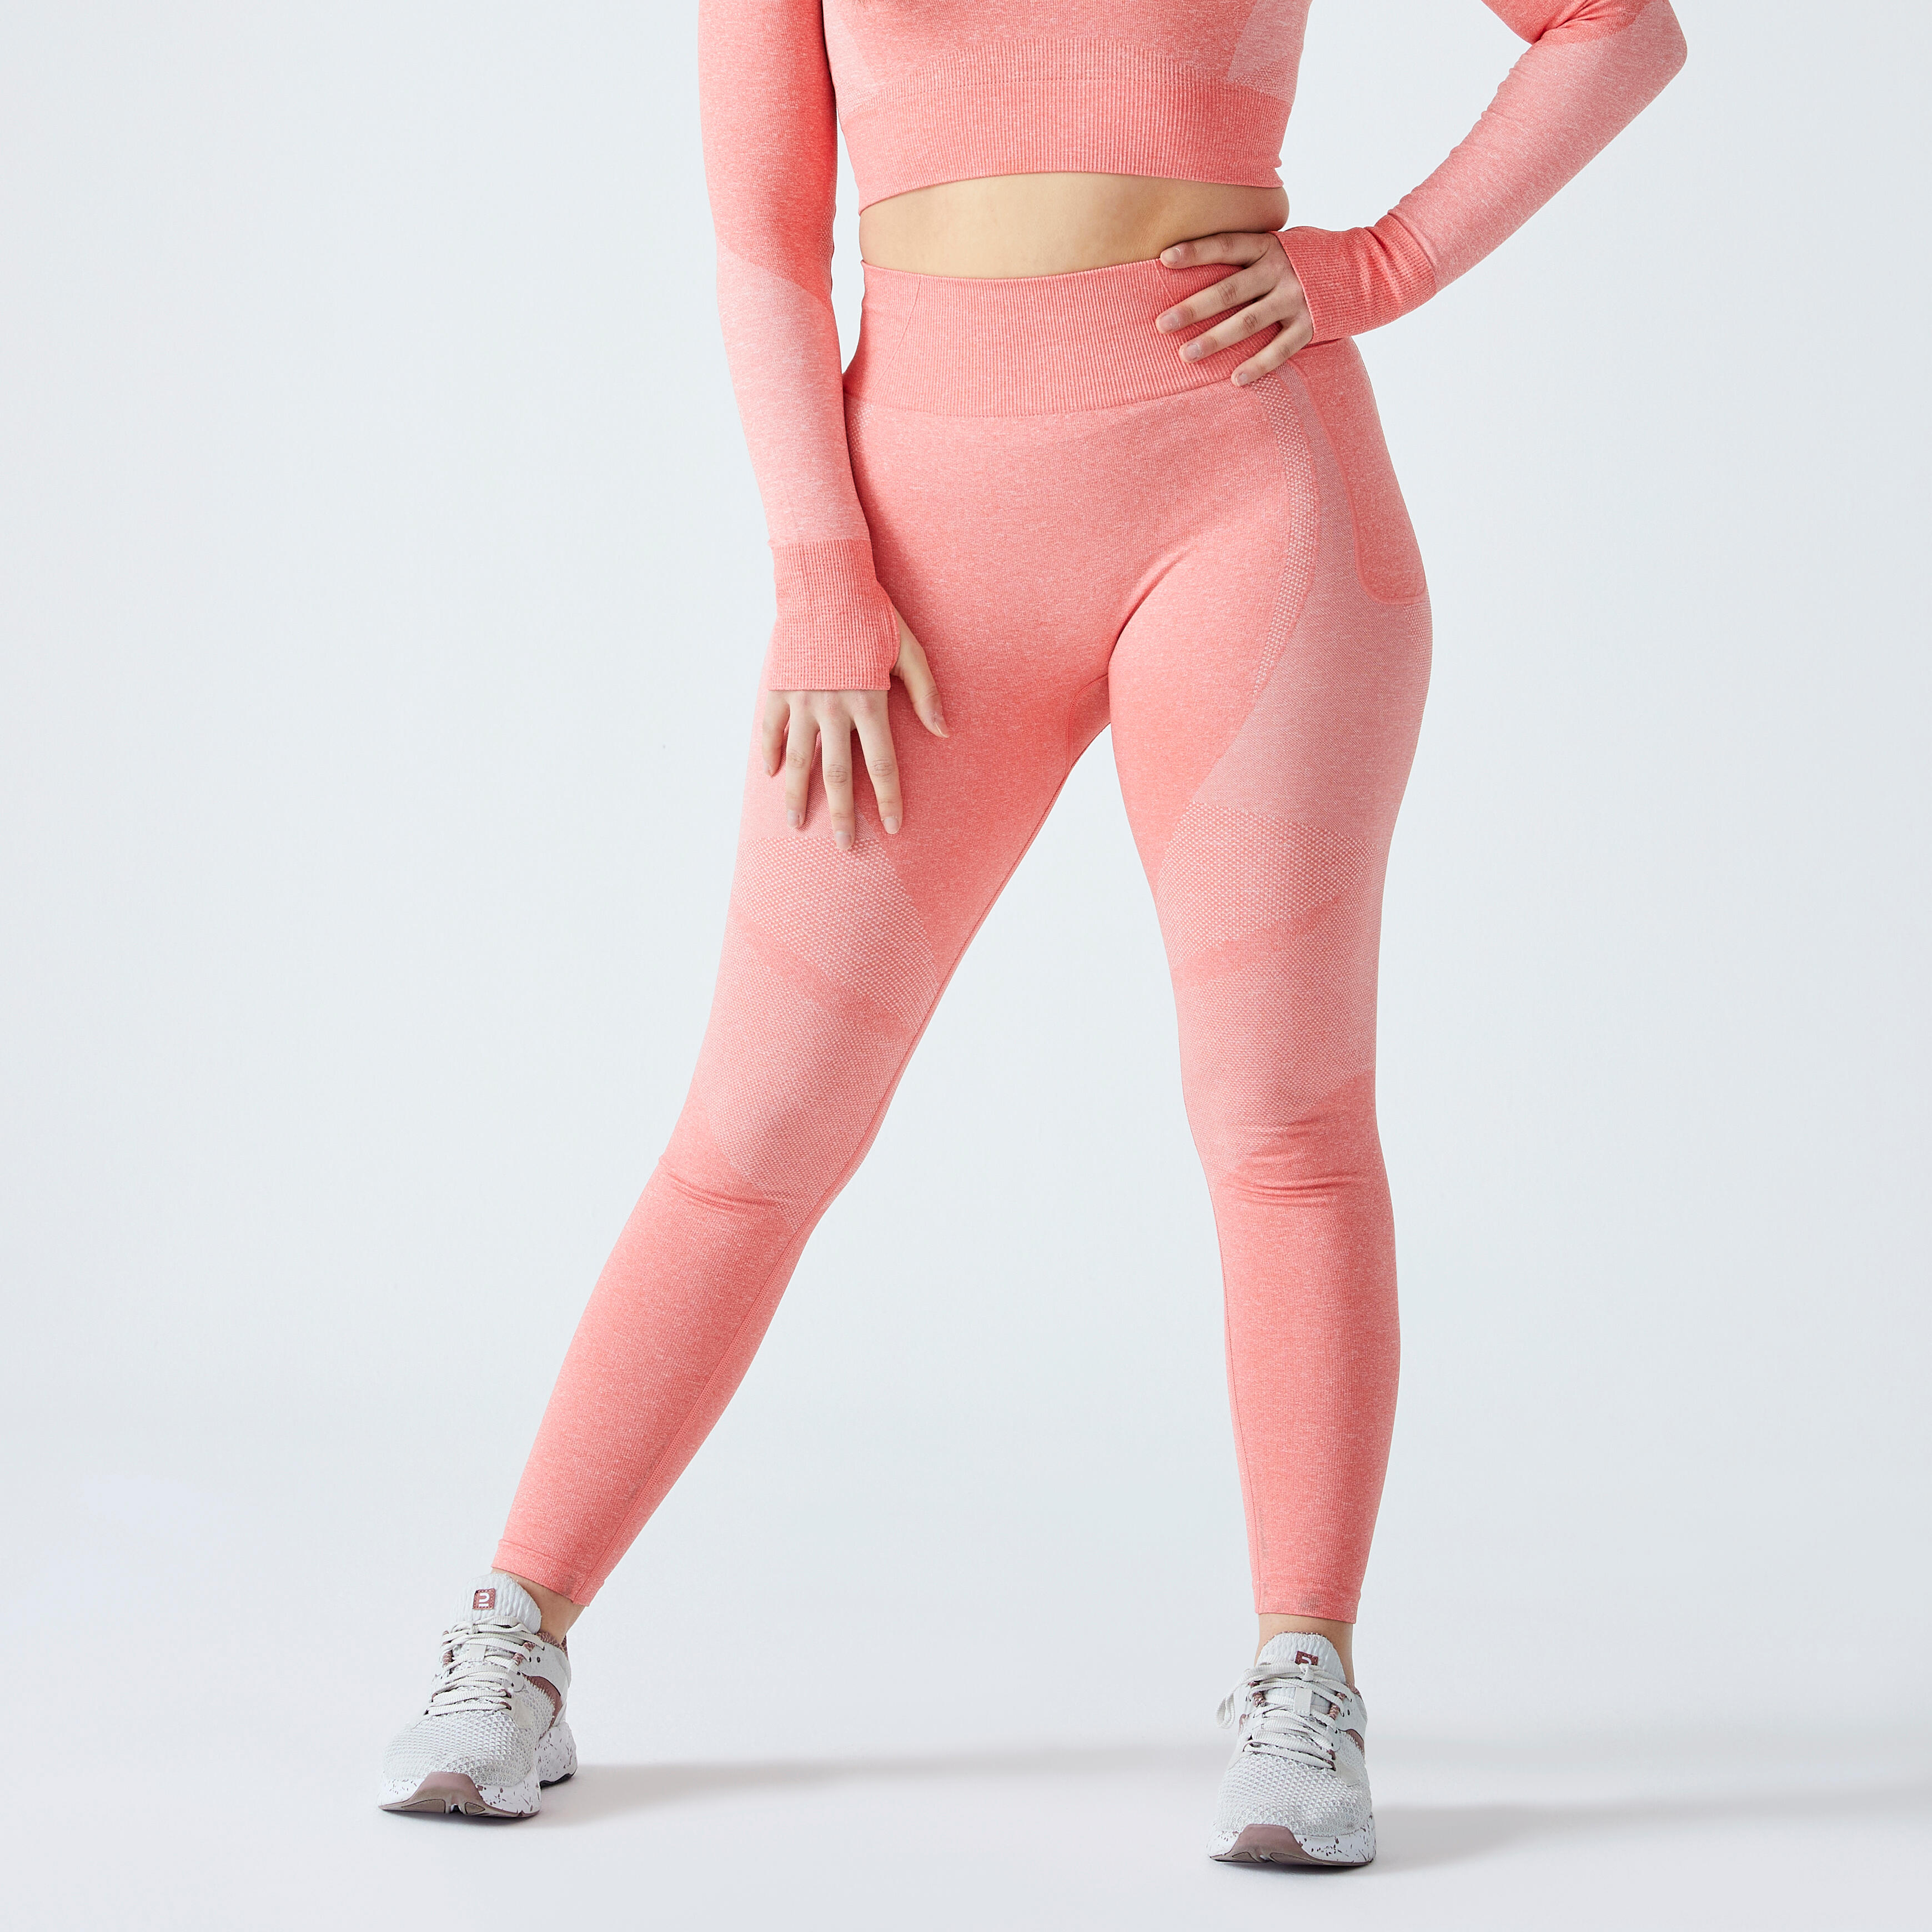 Buy Snug Fit Low Rise Active Tights in Hot Pink with Insert Pockets Online  India, Best Prices, COD - Clovia - AB0059P22